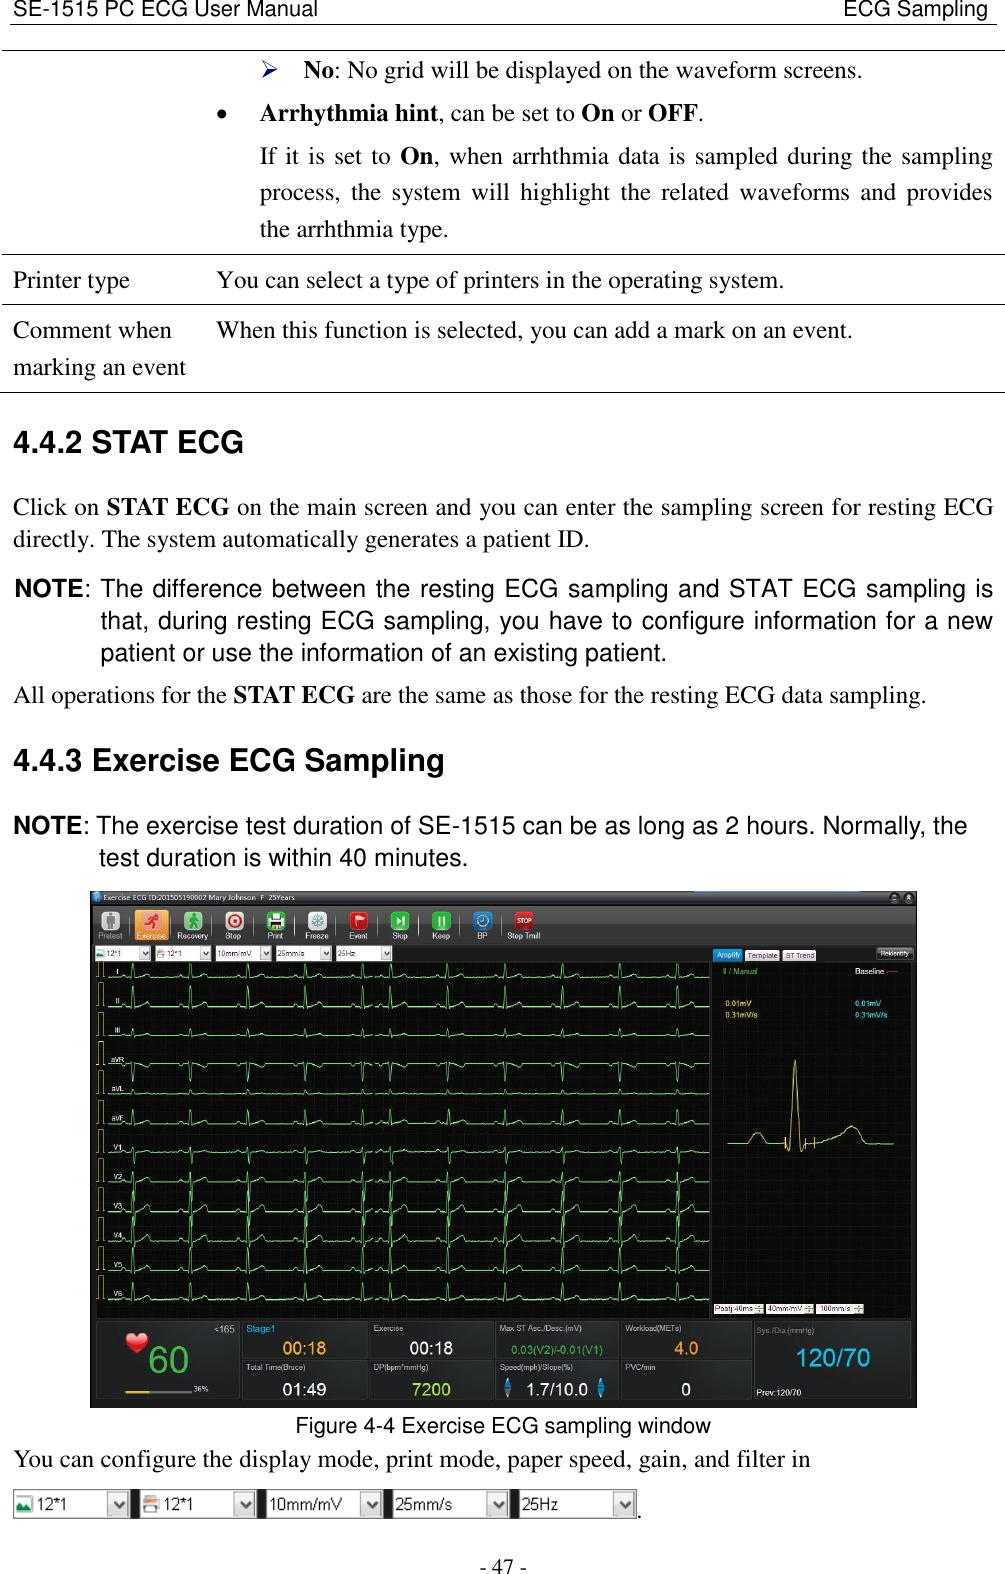 SE-1515 PC ECG User Manual                                                                                              ECG Sampling - 47 -  No: No grid will be displayed on the waveform screens.  Arrhythmia hint, can be set to On or OFF. If it is set to On, when arrhthmia data is sampled during the sampling process, the  system  will  highlight  the  related  waveforms  and  provides the arrhthmia type. Printer type You can select a type of printers in the operating system. Comment when marking an event When this function is selected, you can add a mark on an event. 4.4.2 STAT ECG Click on STAT ECG on the main screen and you can enter the sampling screen for resting ECG directly. The system automatically generates a patient ID. NOTE: The difference between the resting ECG sampling and STAT ECG sampling is that, during resting ECG sampling, you have to configure information for a new patient or use the information of an existing patient. All operations for the STAT ECG are the same as those for the resting ECG data sampling. 4.4.3 Exercise ECG Sampling NOTE: The exercise test duration of SE-1515 can be as long as 2 hours. Normally, the test duration is within 40 minutes.  Figure 4-4 Exercise ECG sampling window You can configure the display mode, print mode, paper speed, gain, and filter in   . 